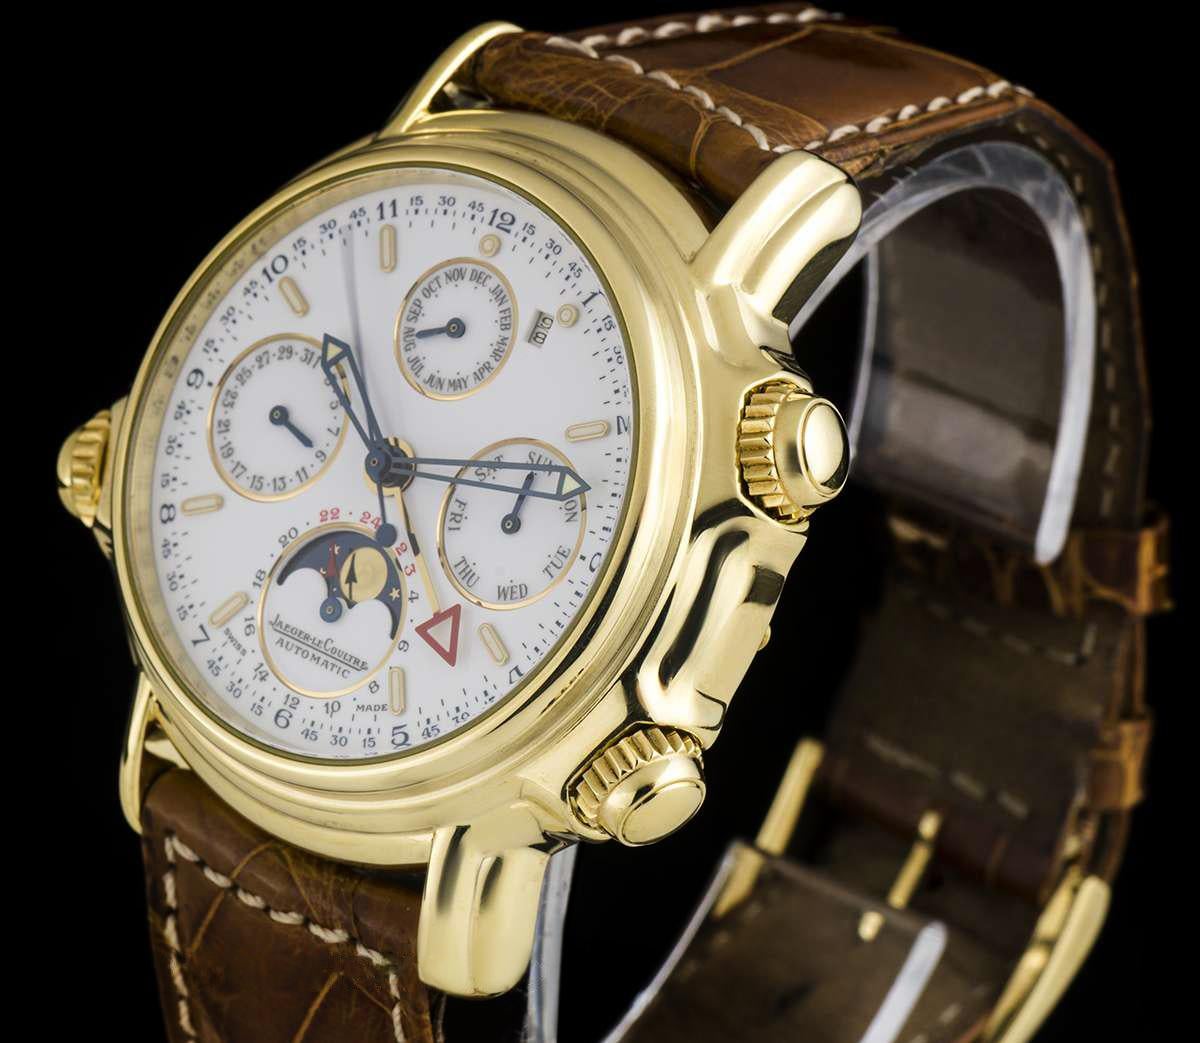 An 18k Yellow Gold Perpetual Calendar Alarm Grande Reveil Gents Wristwatch, white dial with applied hour markers, blue steel skeletonised hands, red arrowed alarm hand, year aperture at 1 0'clock, weekday sub-dial at 3 0'clock, moonphase and 24 hour